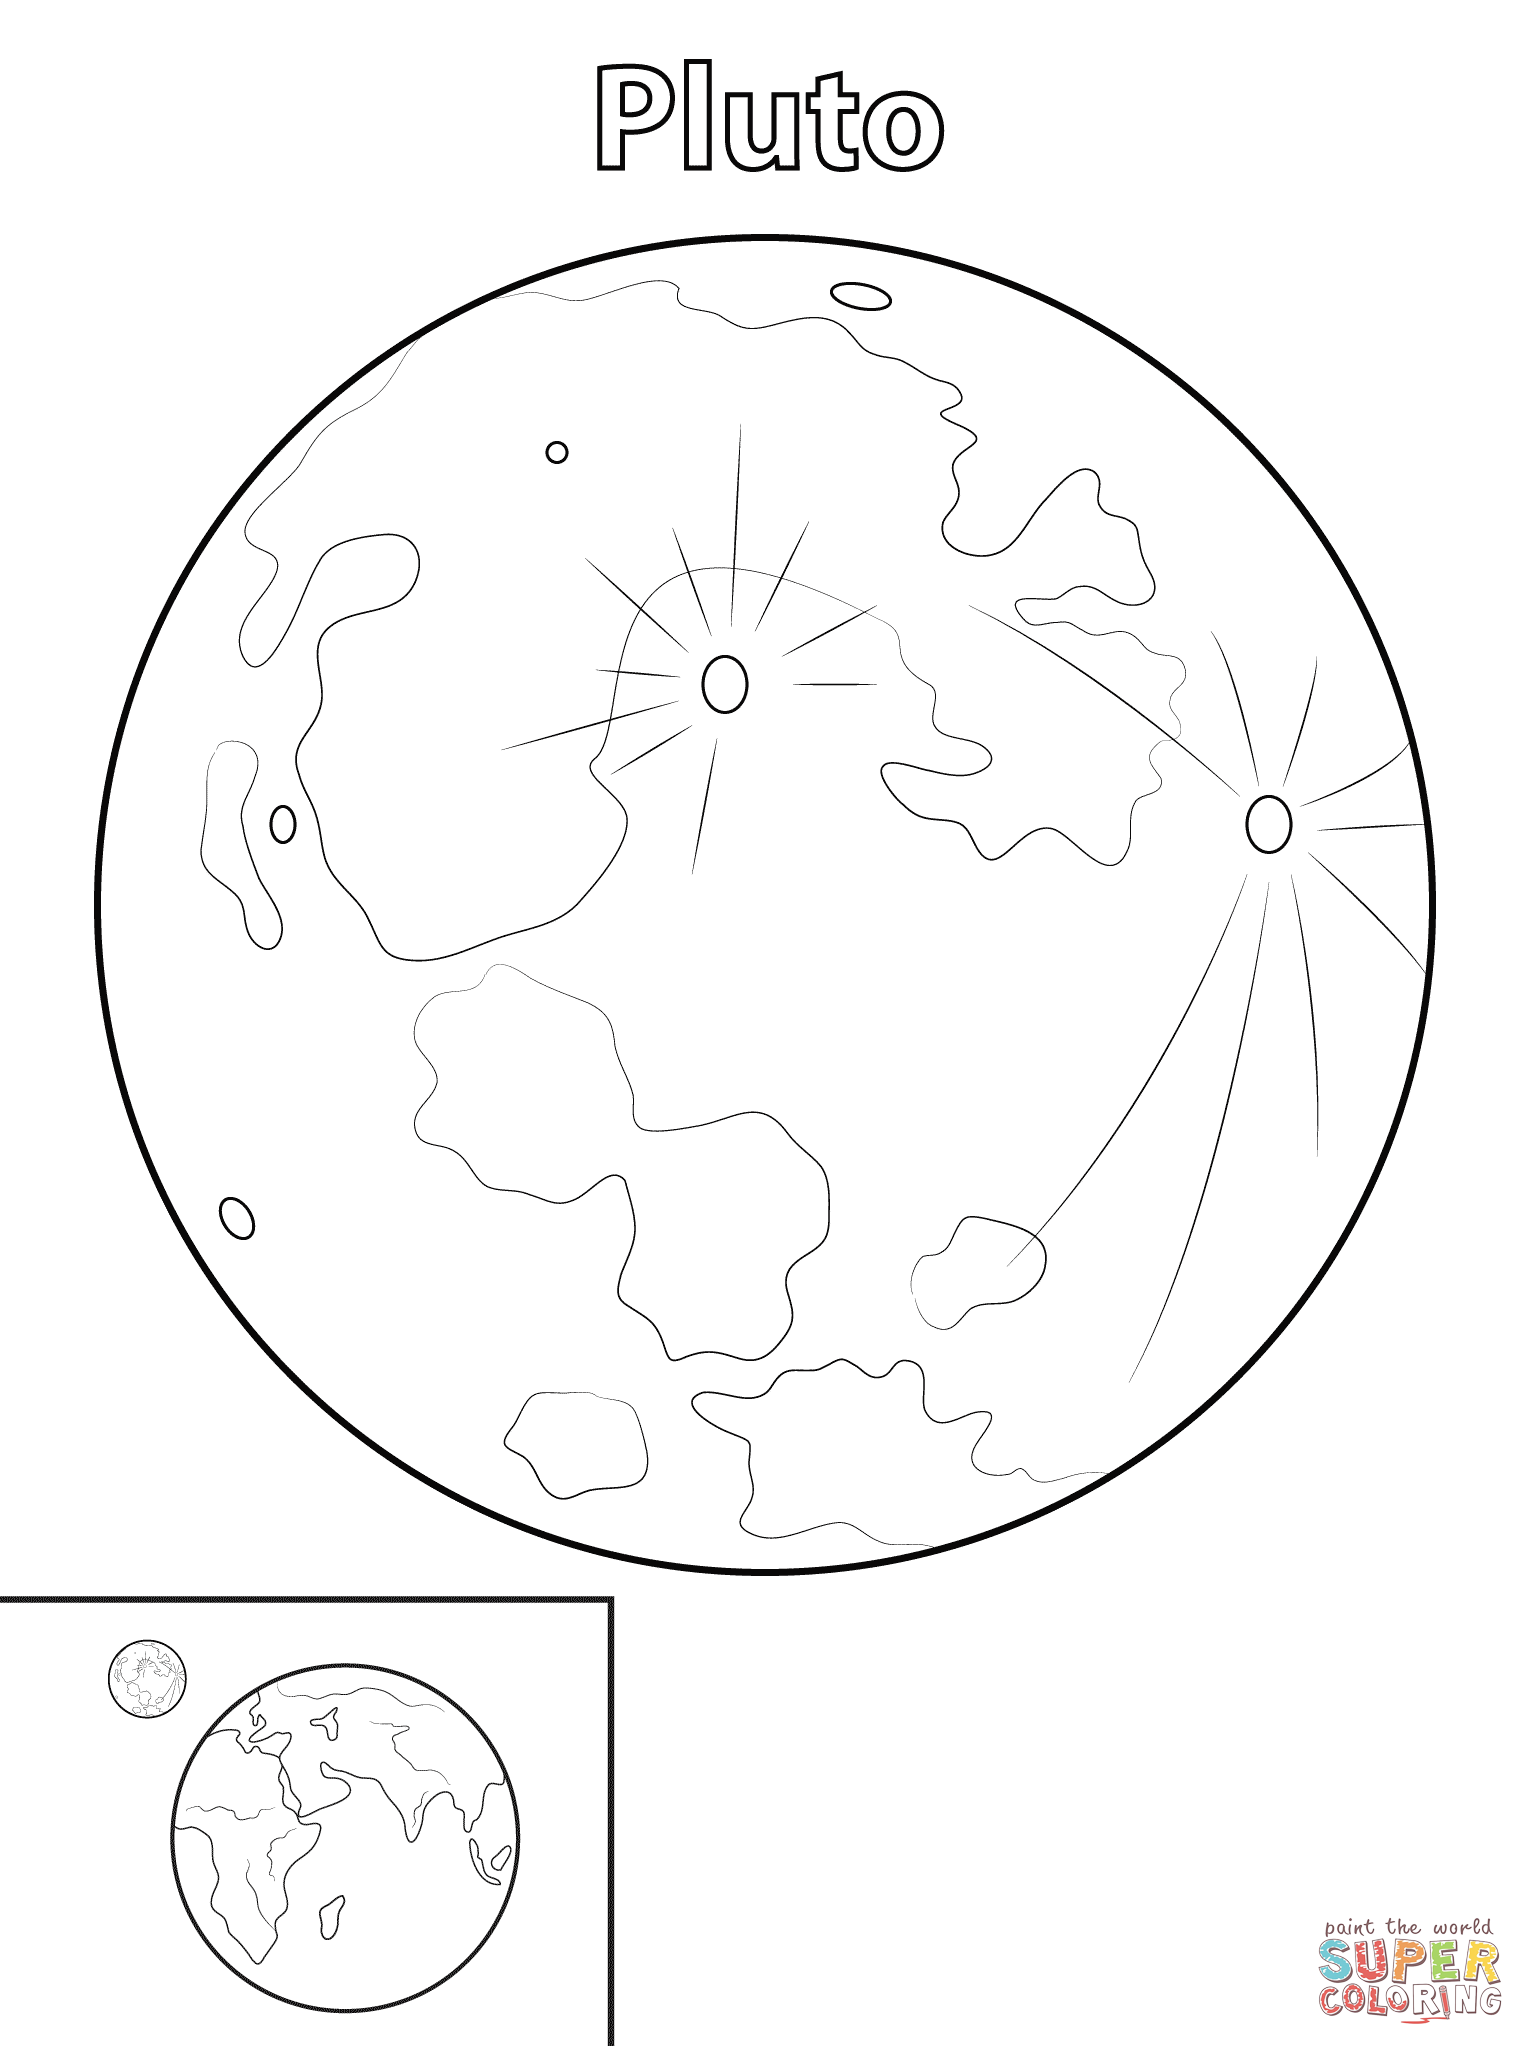 Pluto Planet Coloring page | Free Printable Coloring Pages